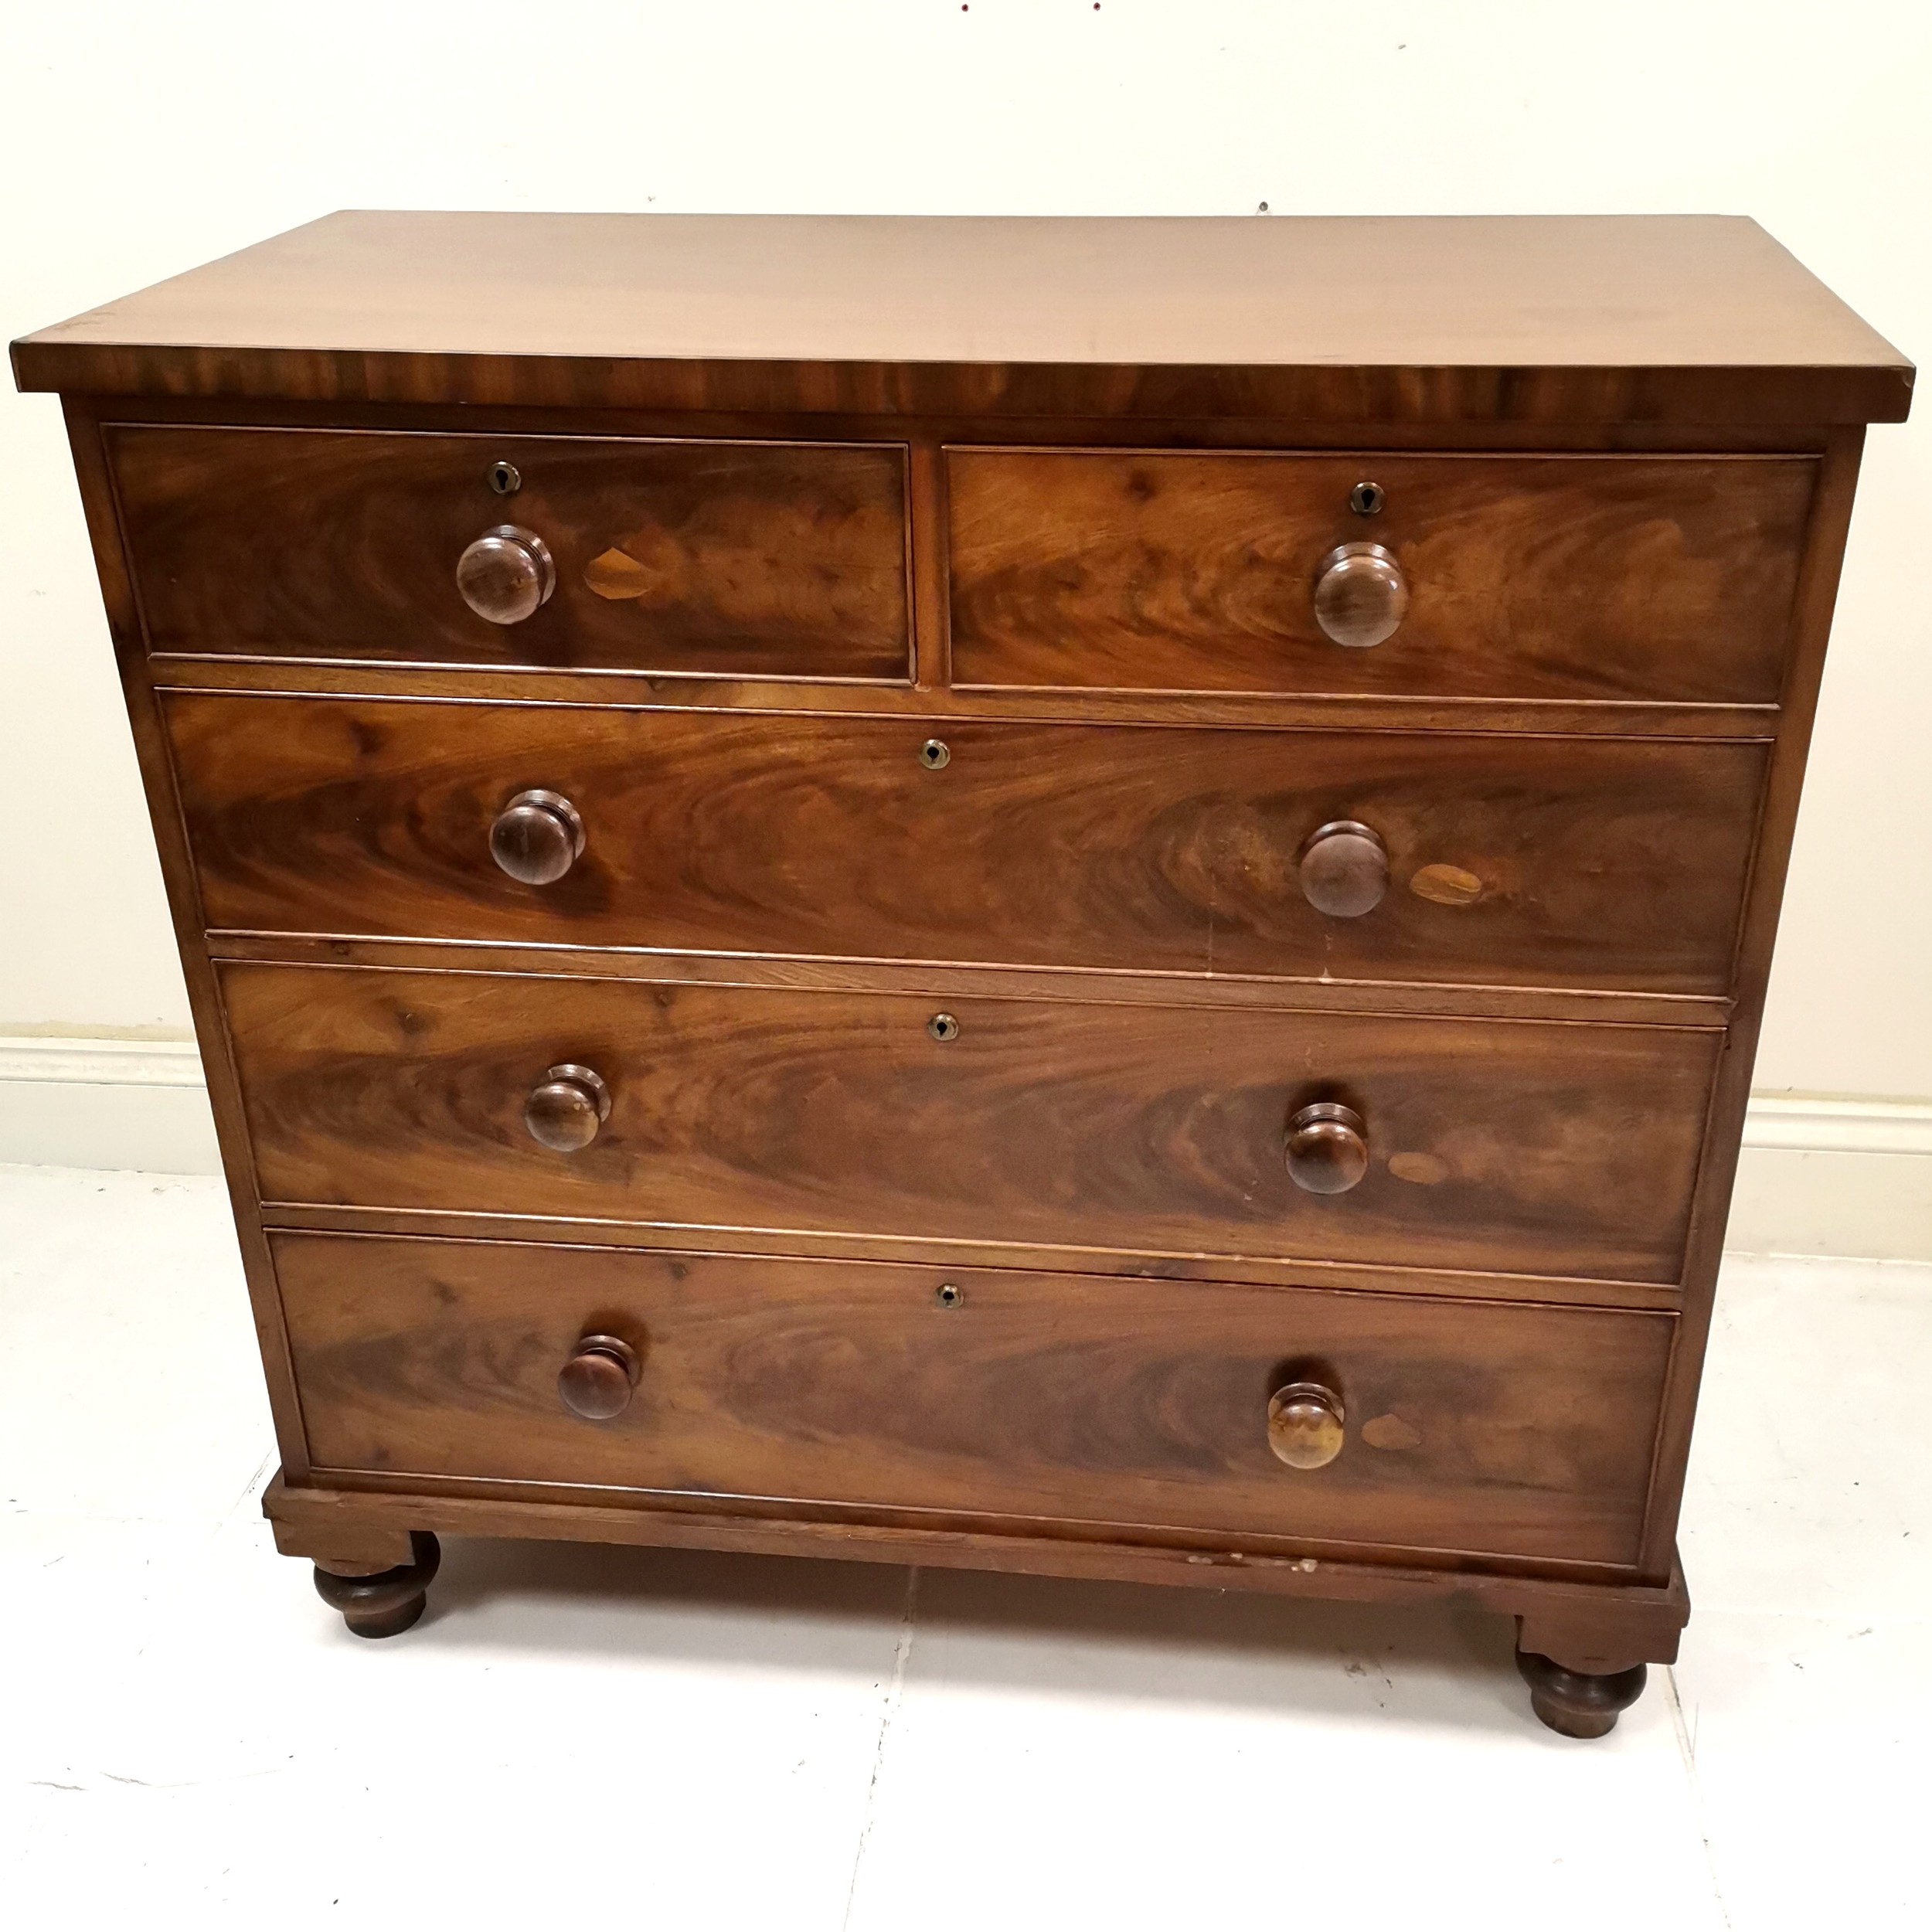 Antique Mahogany chest of 2 short and 3 long graduated drawers, with turned wooden knobs, turned